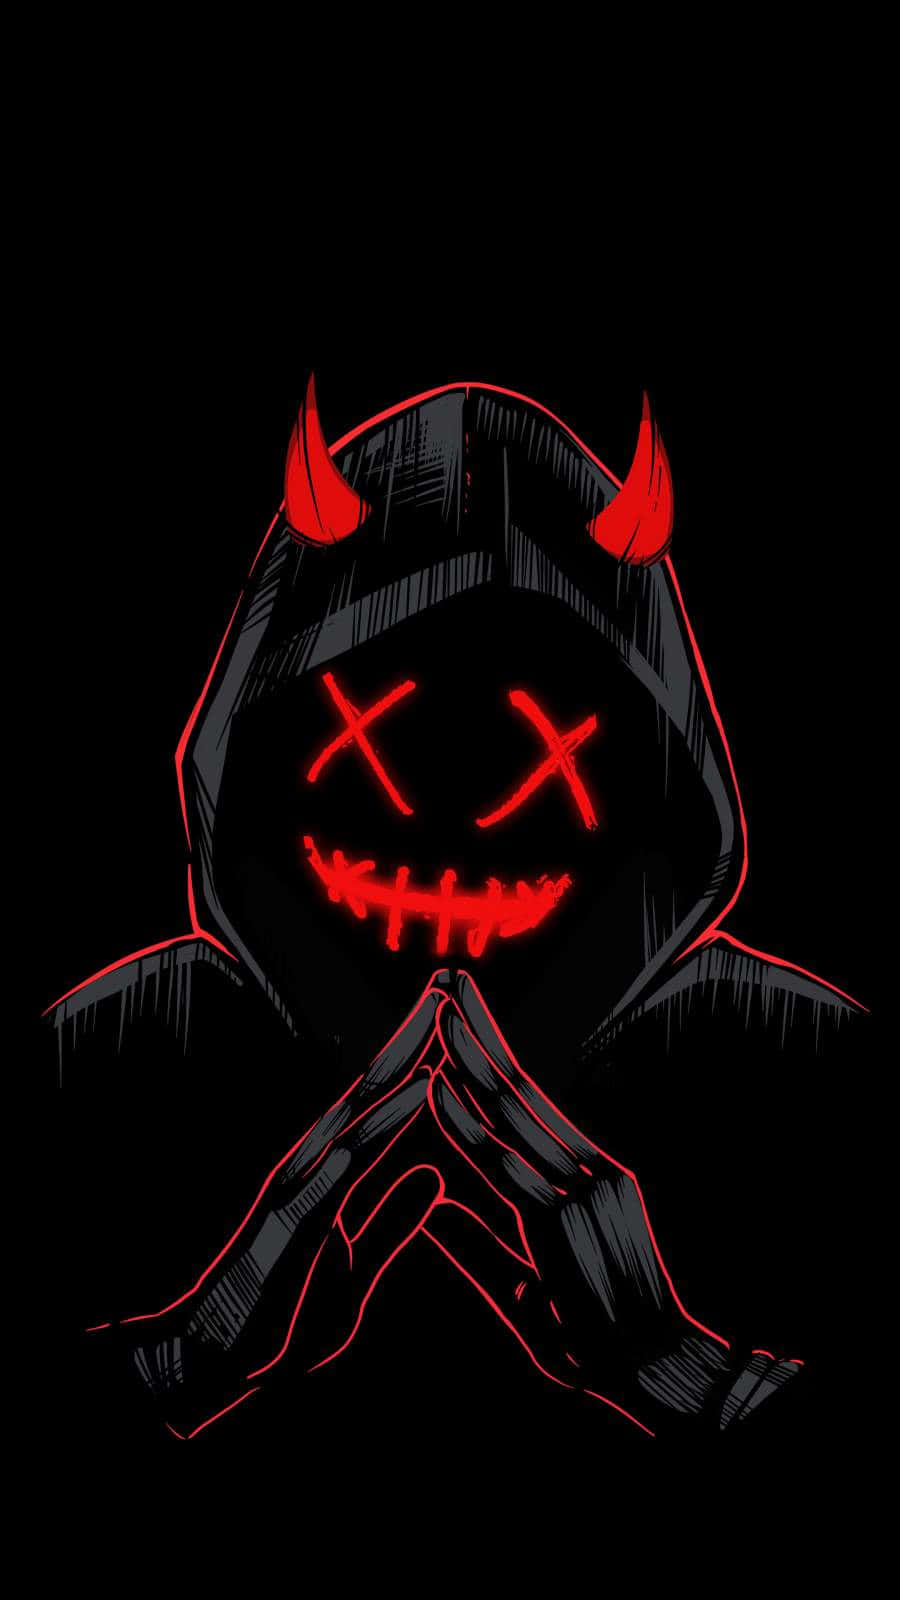 A Devil With Red Eyes And Horns On His Face Wallpaper